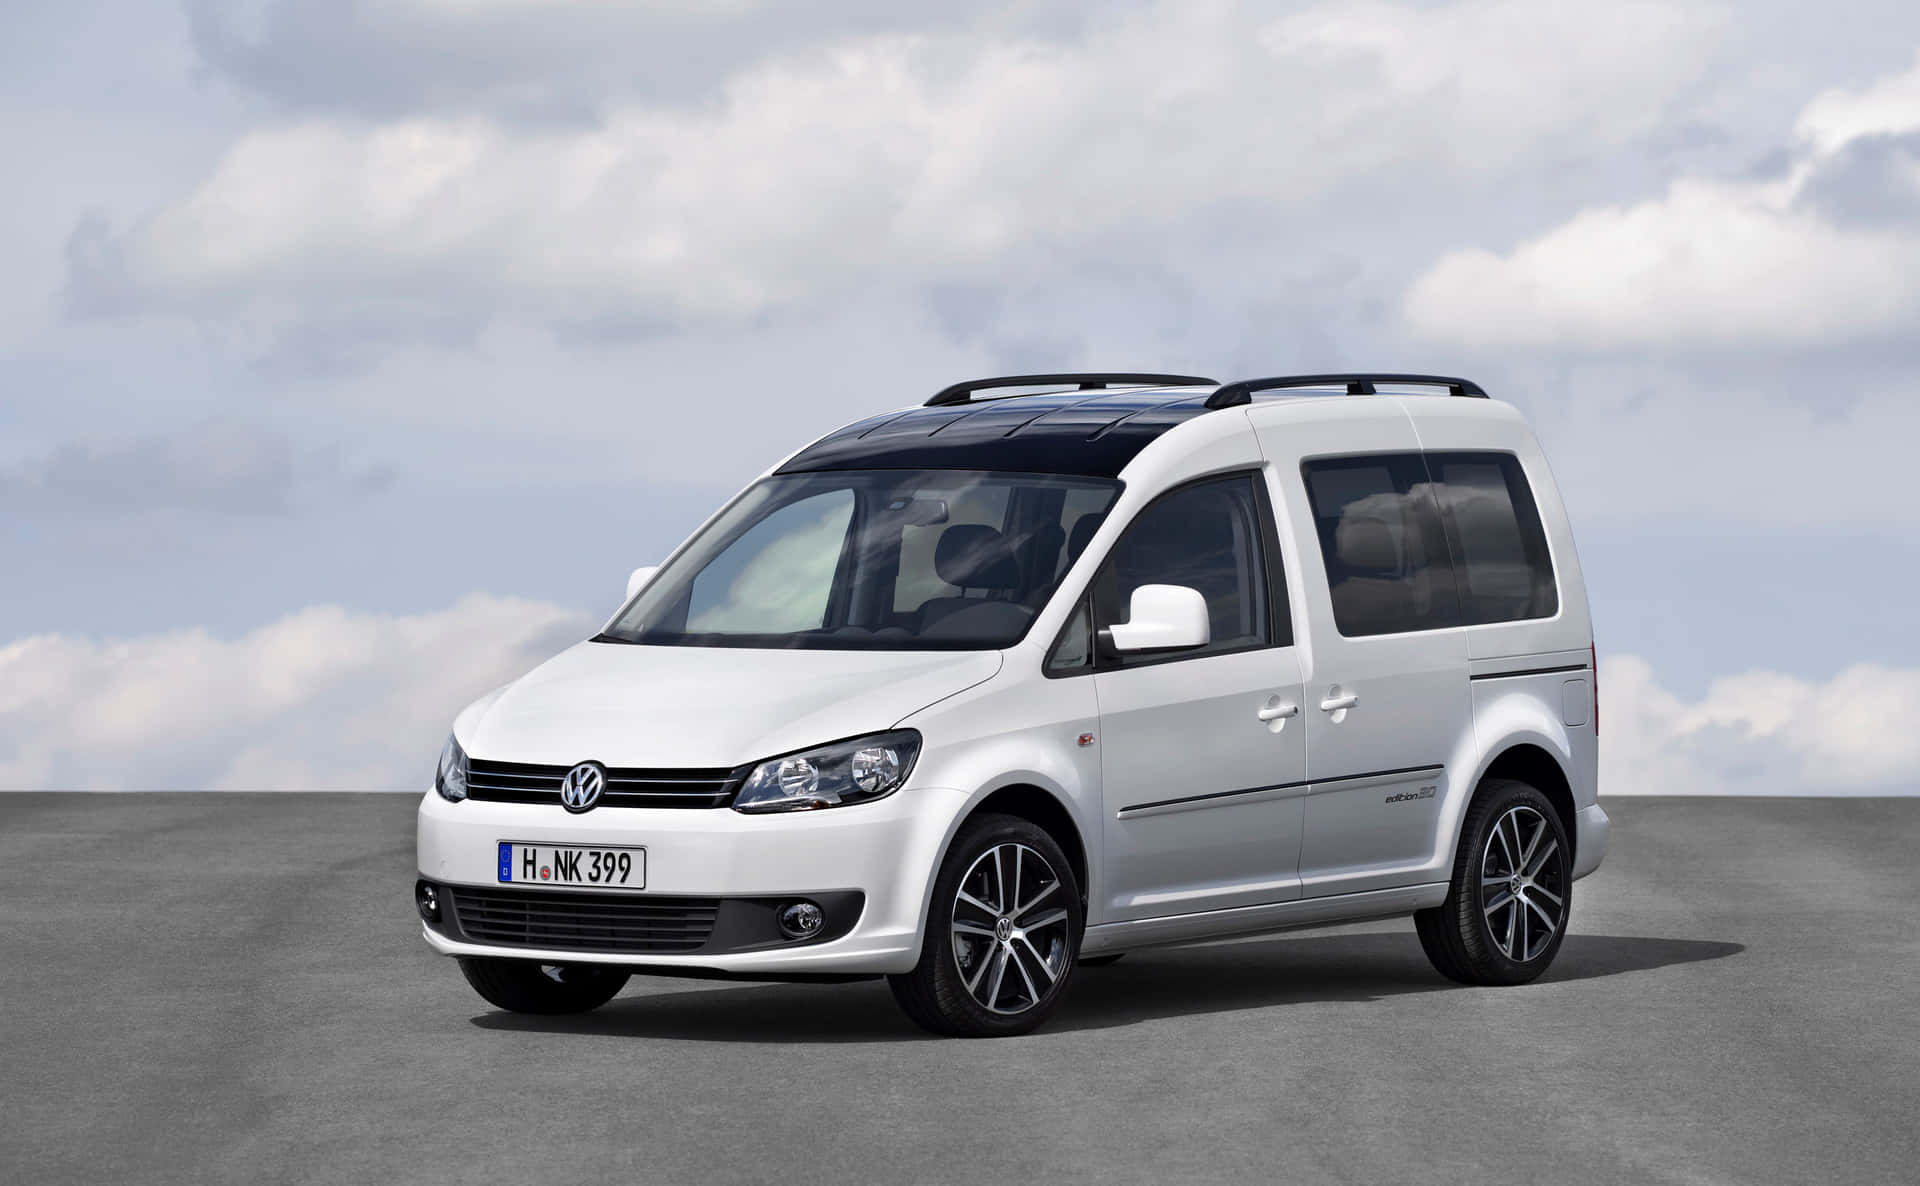 Sleek And Stylish - The Volkswagen Caddy On City Streets Wallpaper